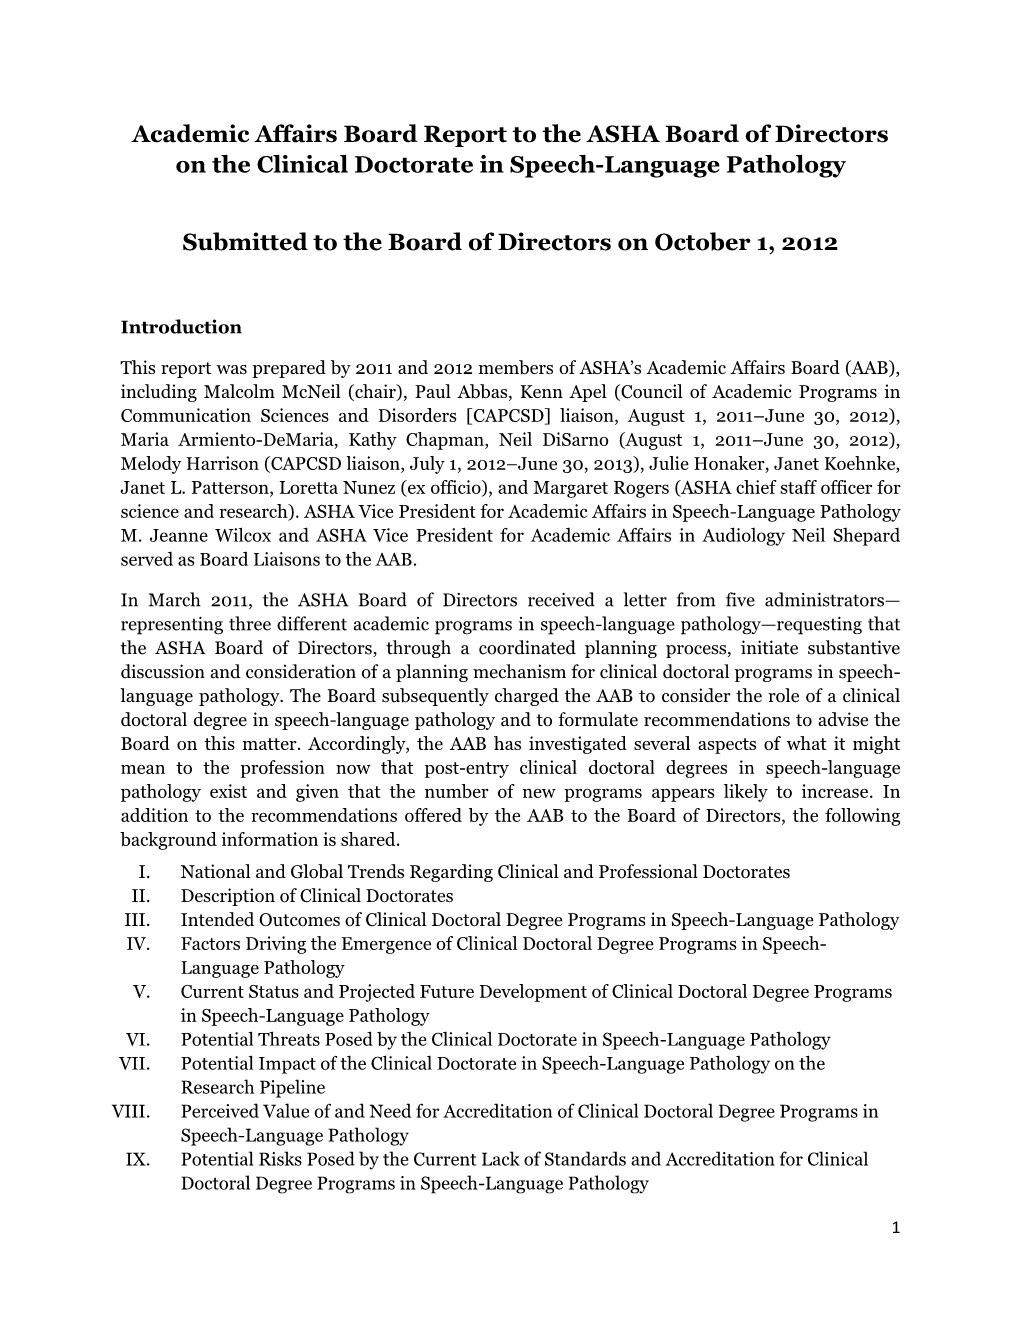 Academic Affairs Board Report on the Clinical Doctorate in Speech